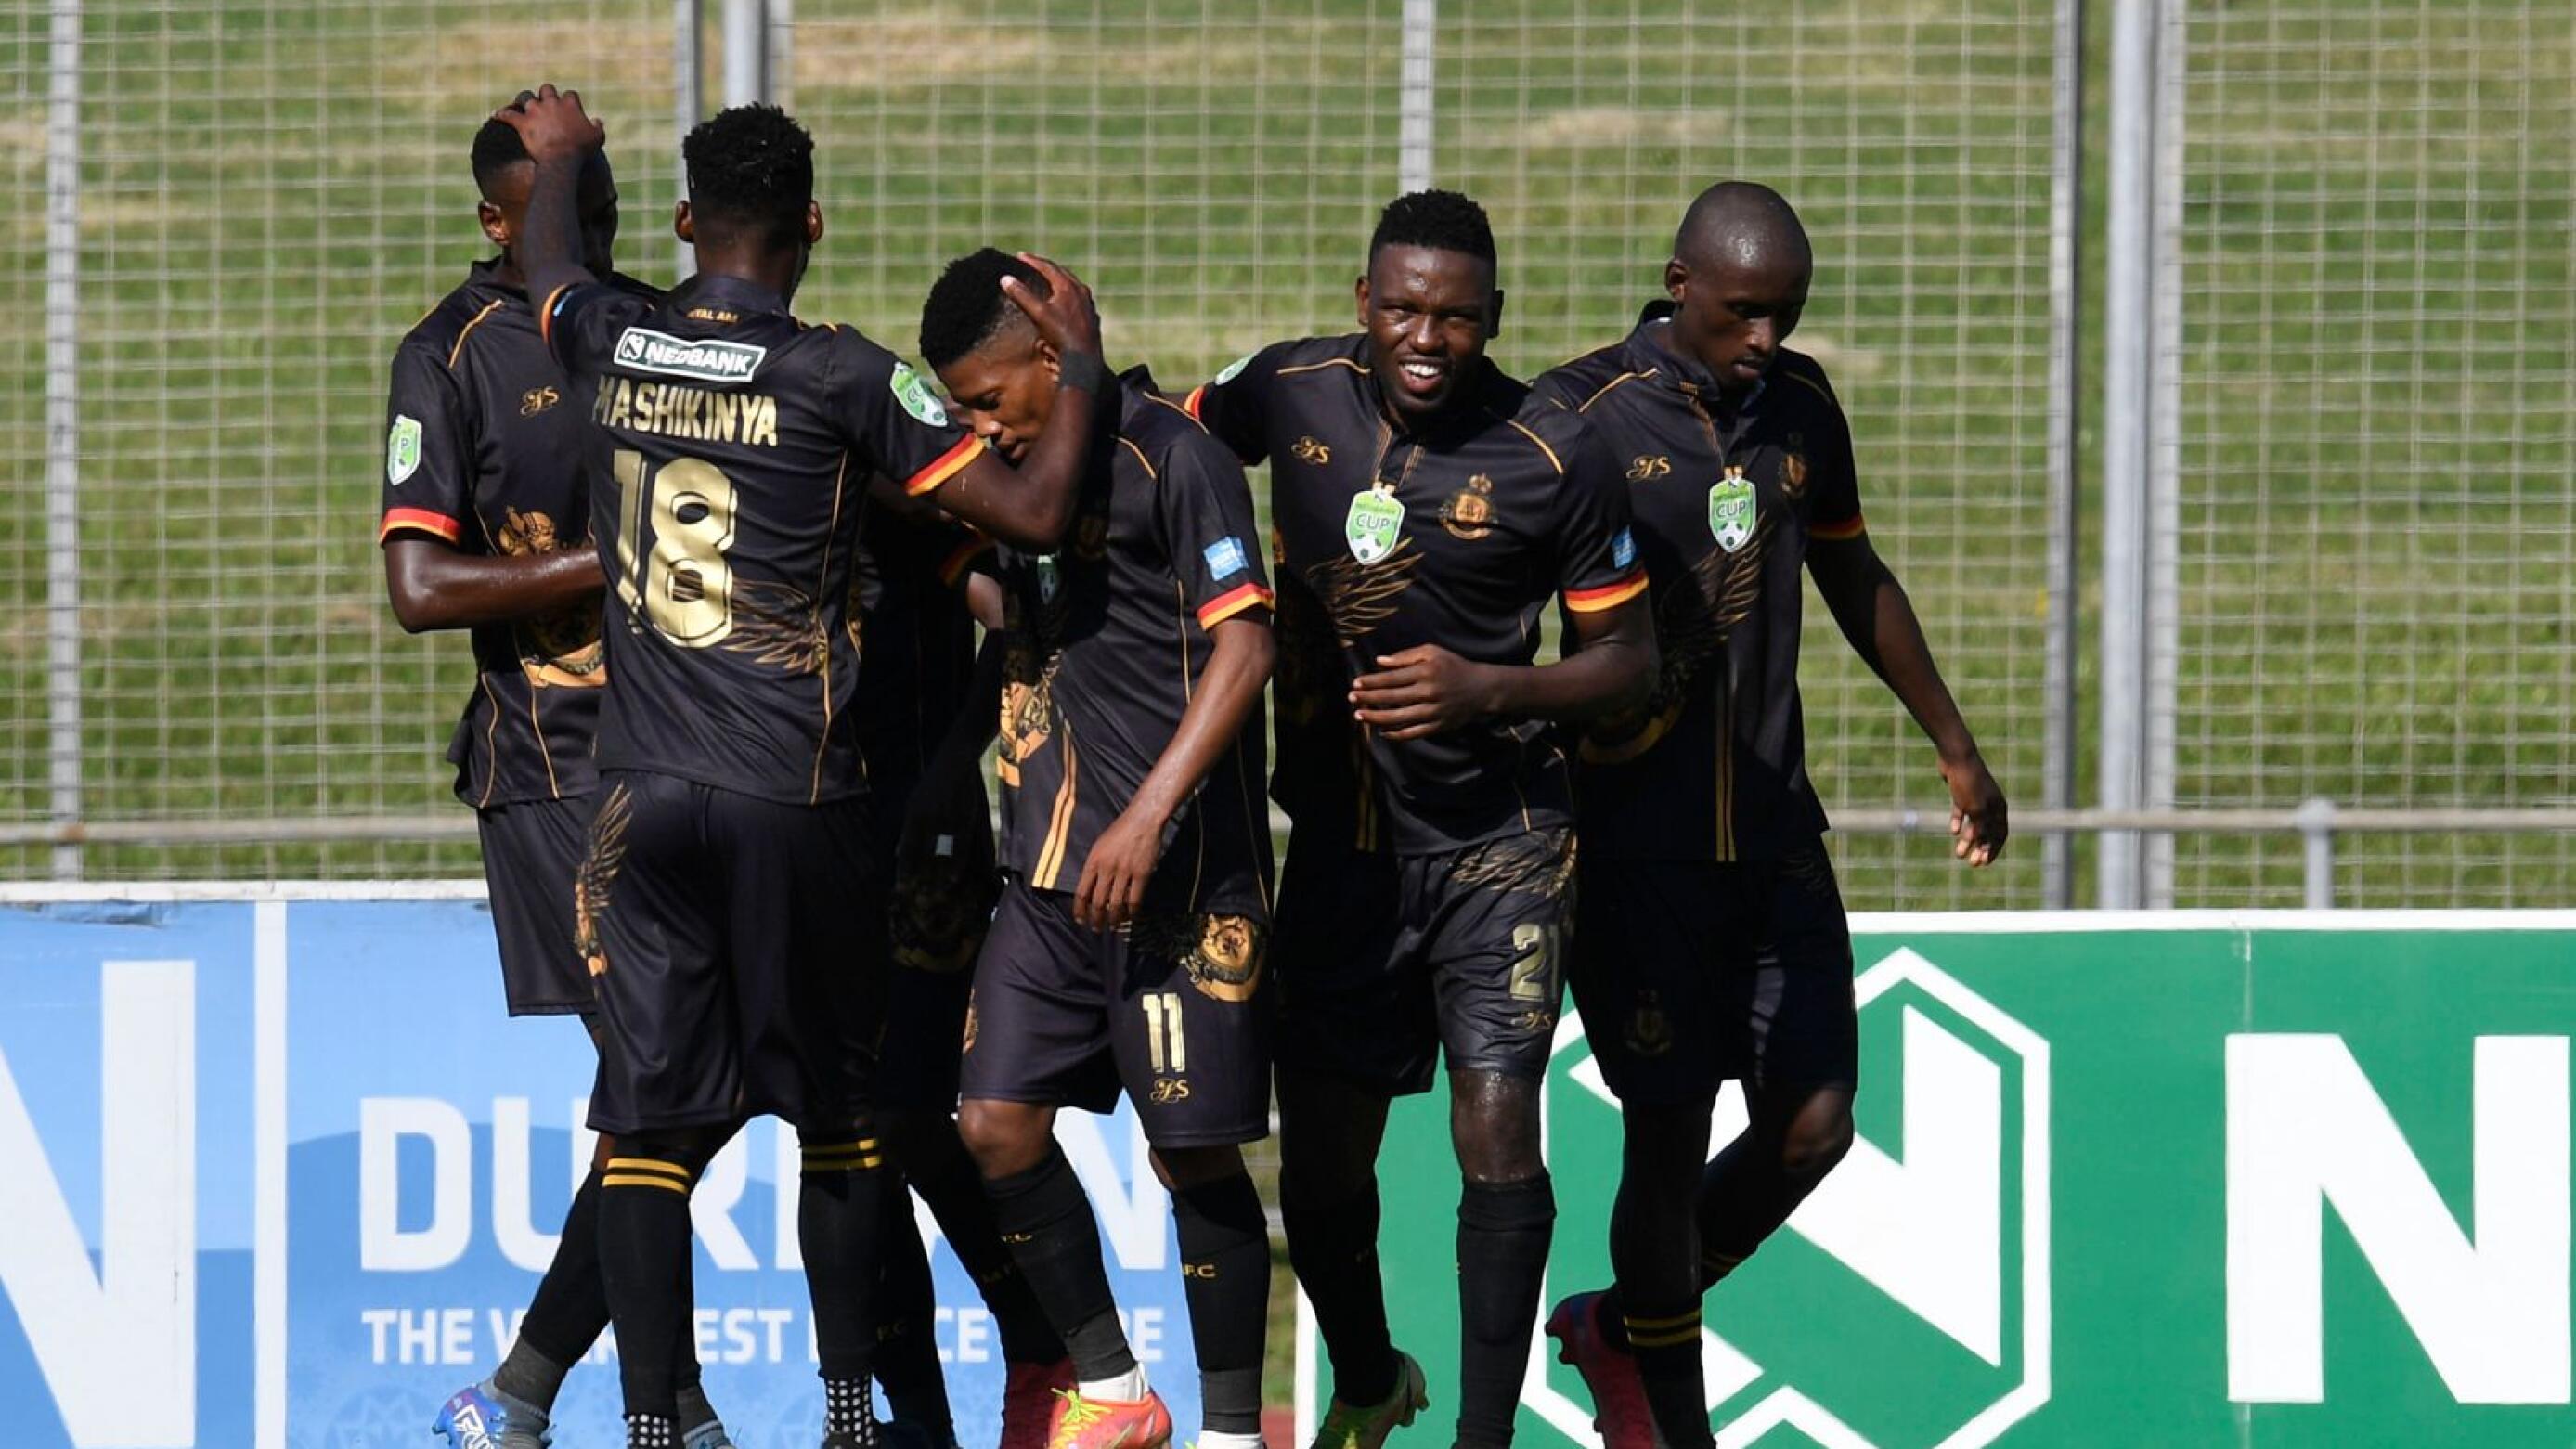 Lantshene Phalane of Royal AM celebrates with teammates after scoring during their Nedbank Cup Last 32 match against Cape Town City at Chartsworth Stadium on Saturday